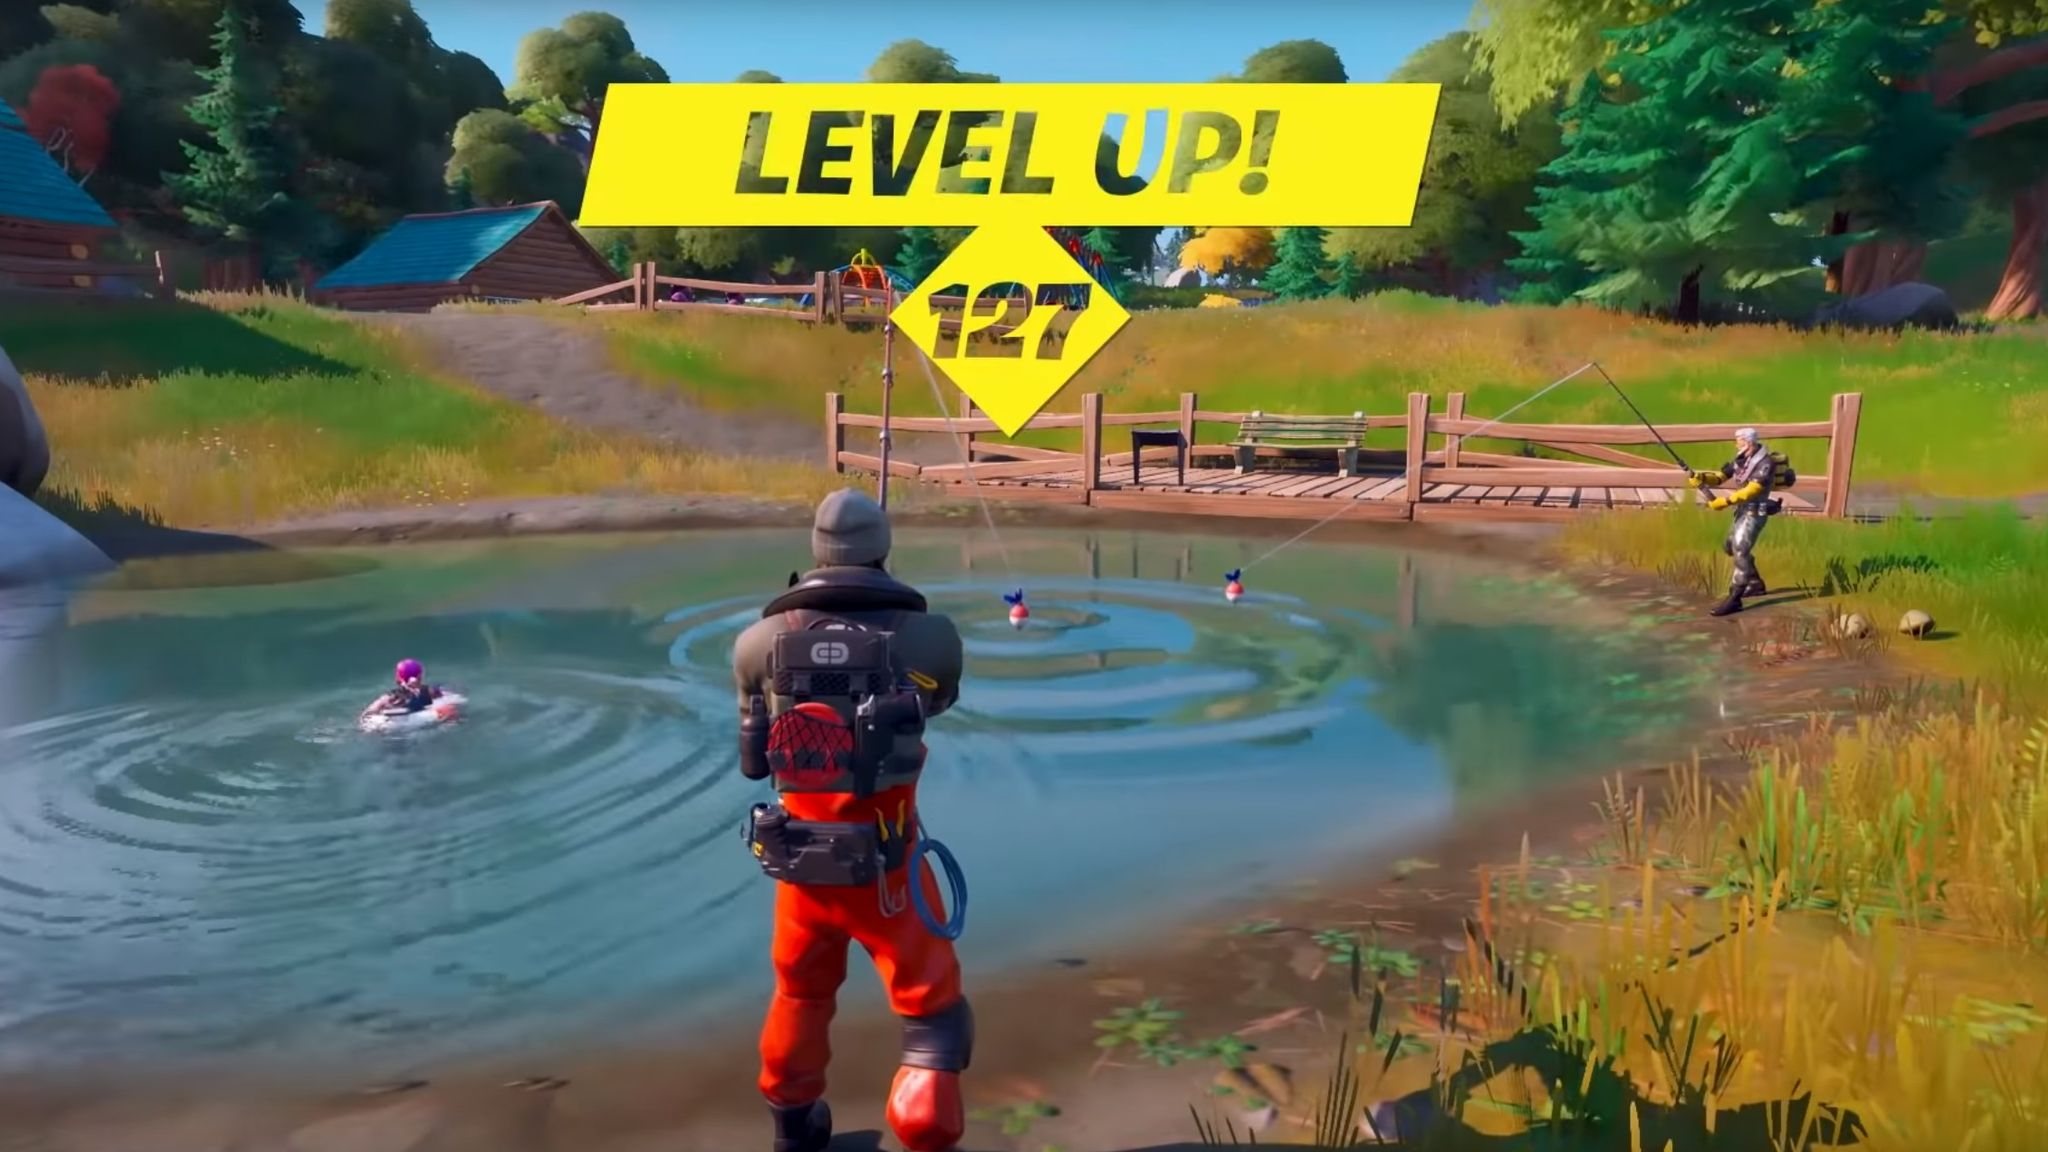 Fortnite Chapter 2 trailer leaks online - here's what it shows